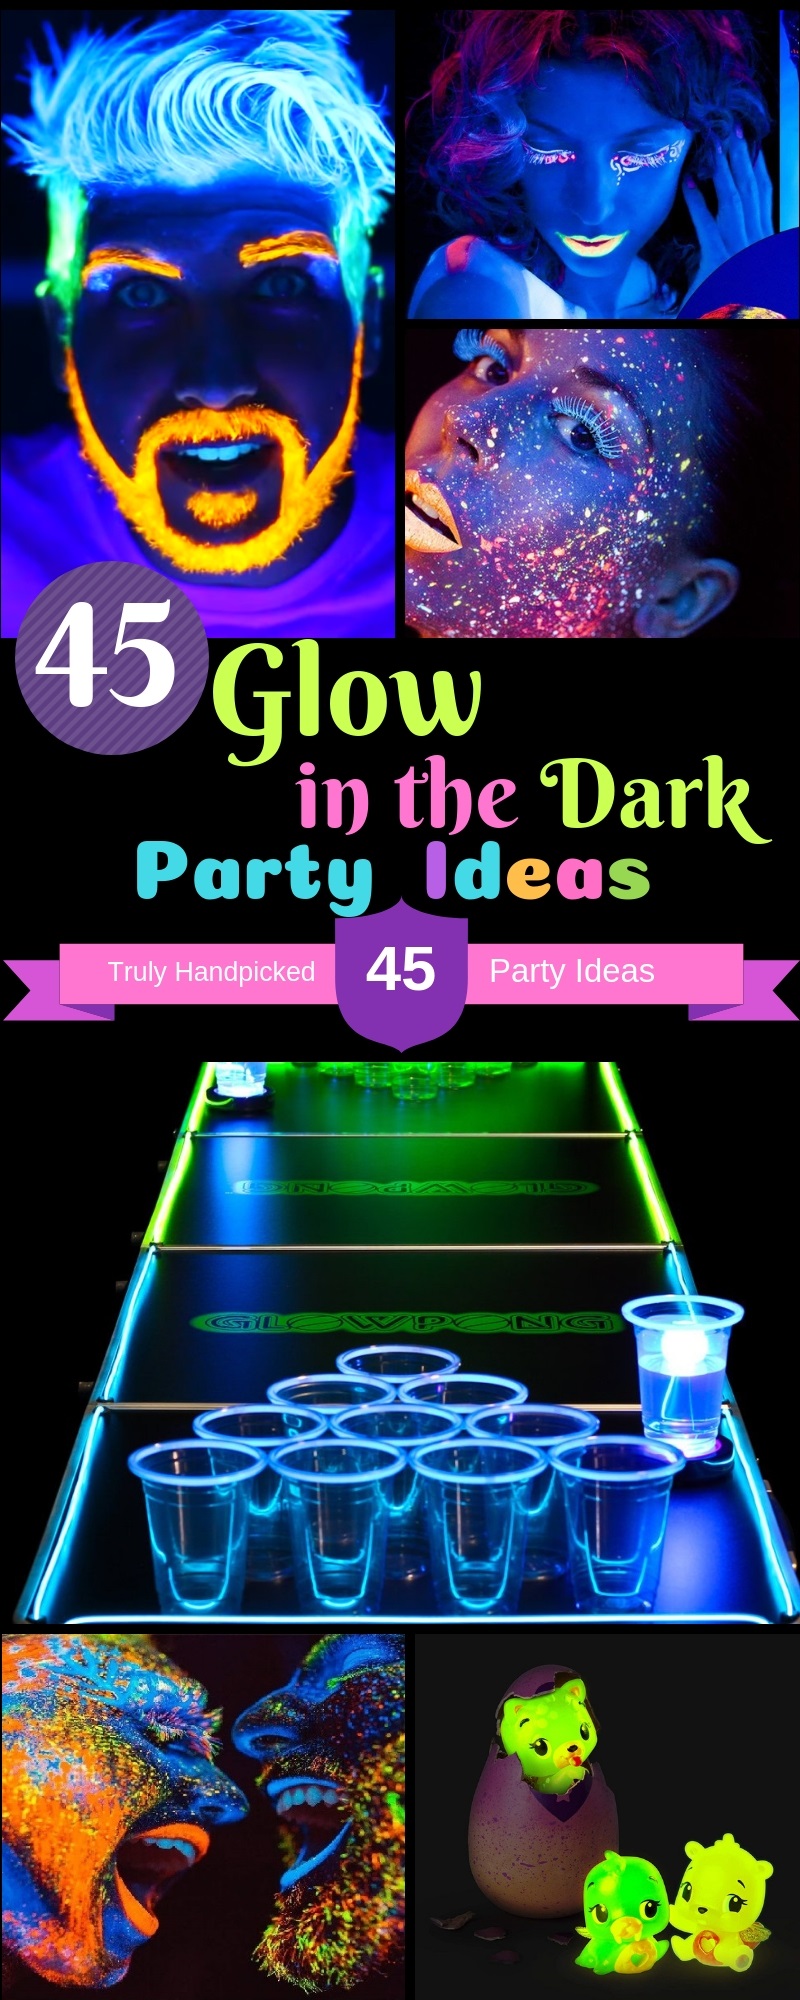 45 Glow In The Dark Party Ideas: Neon Night-glow Party Food & Paint Ideas